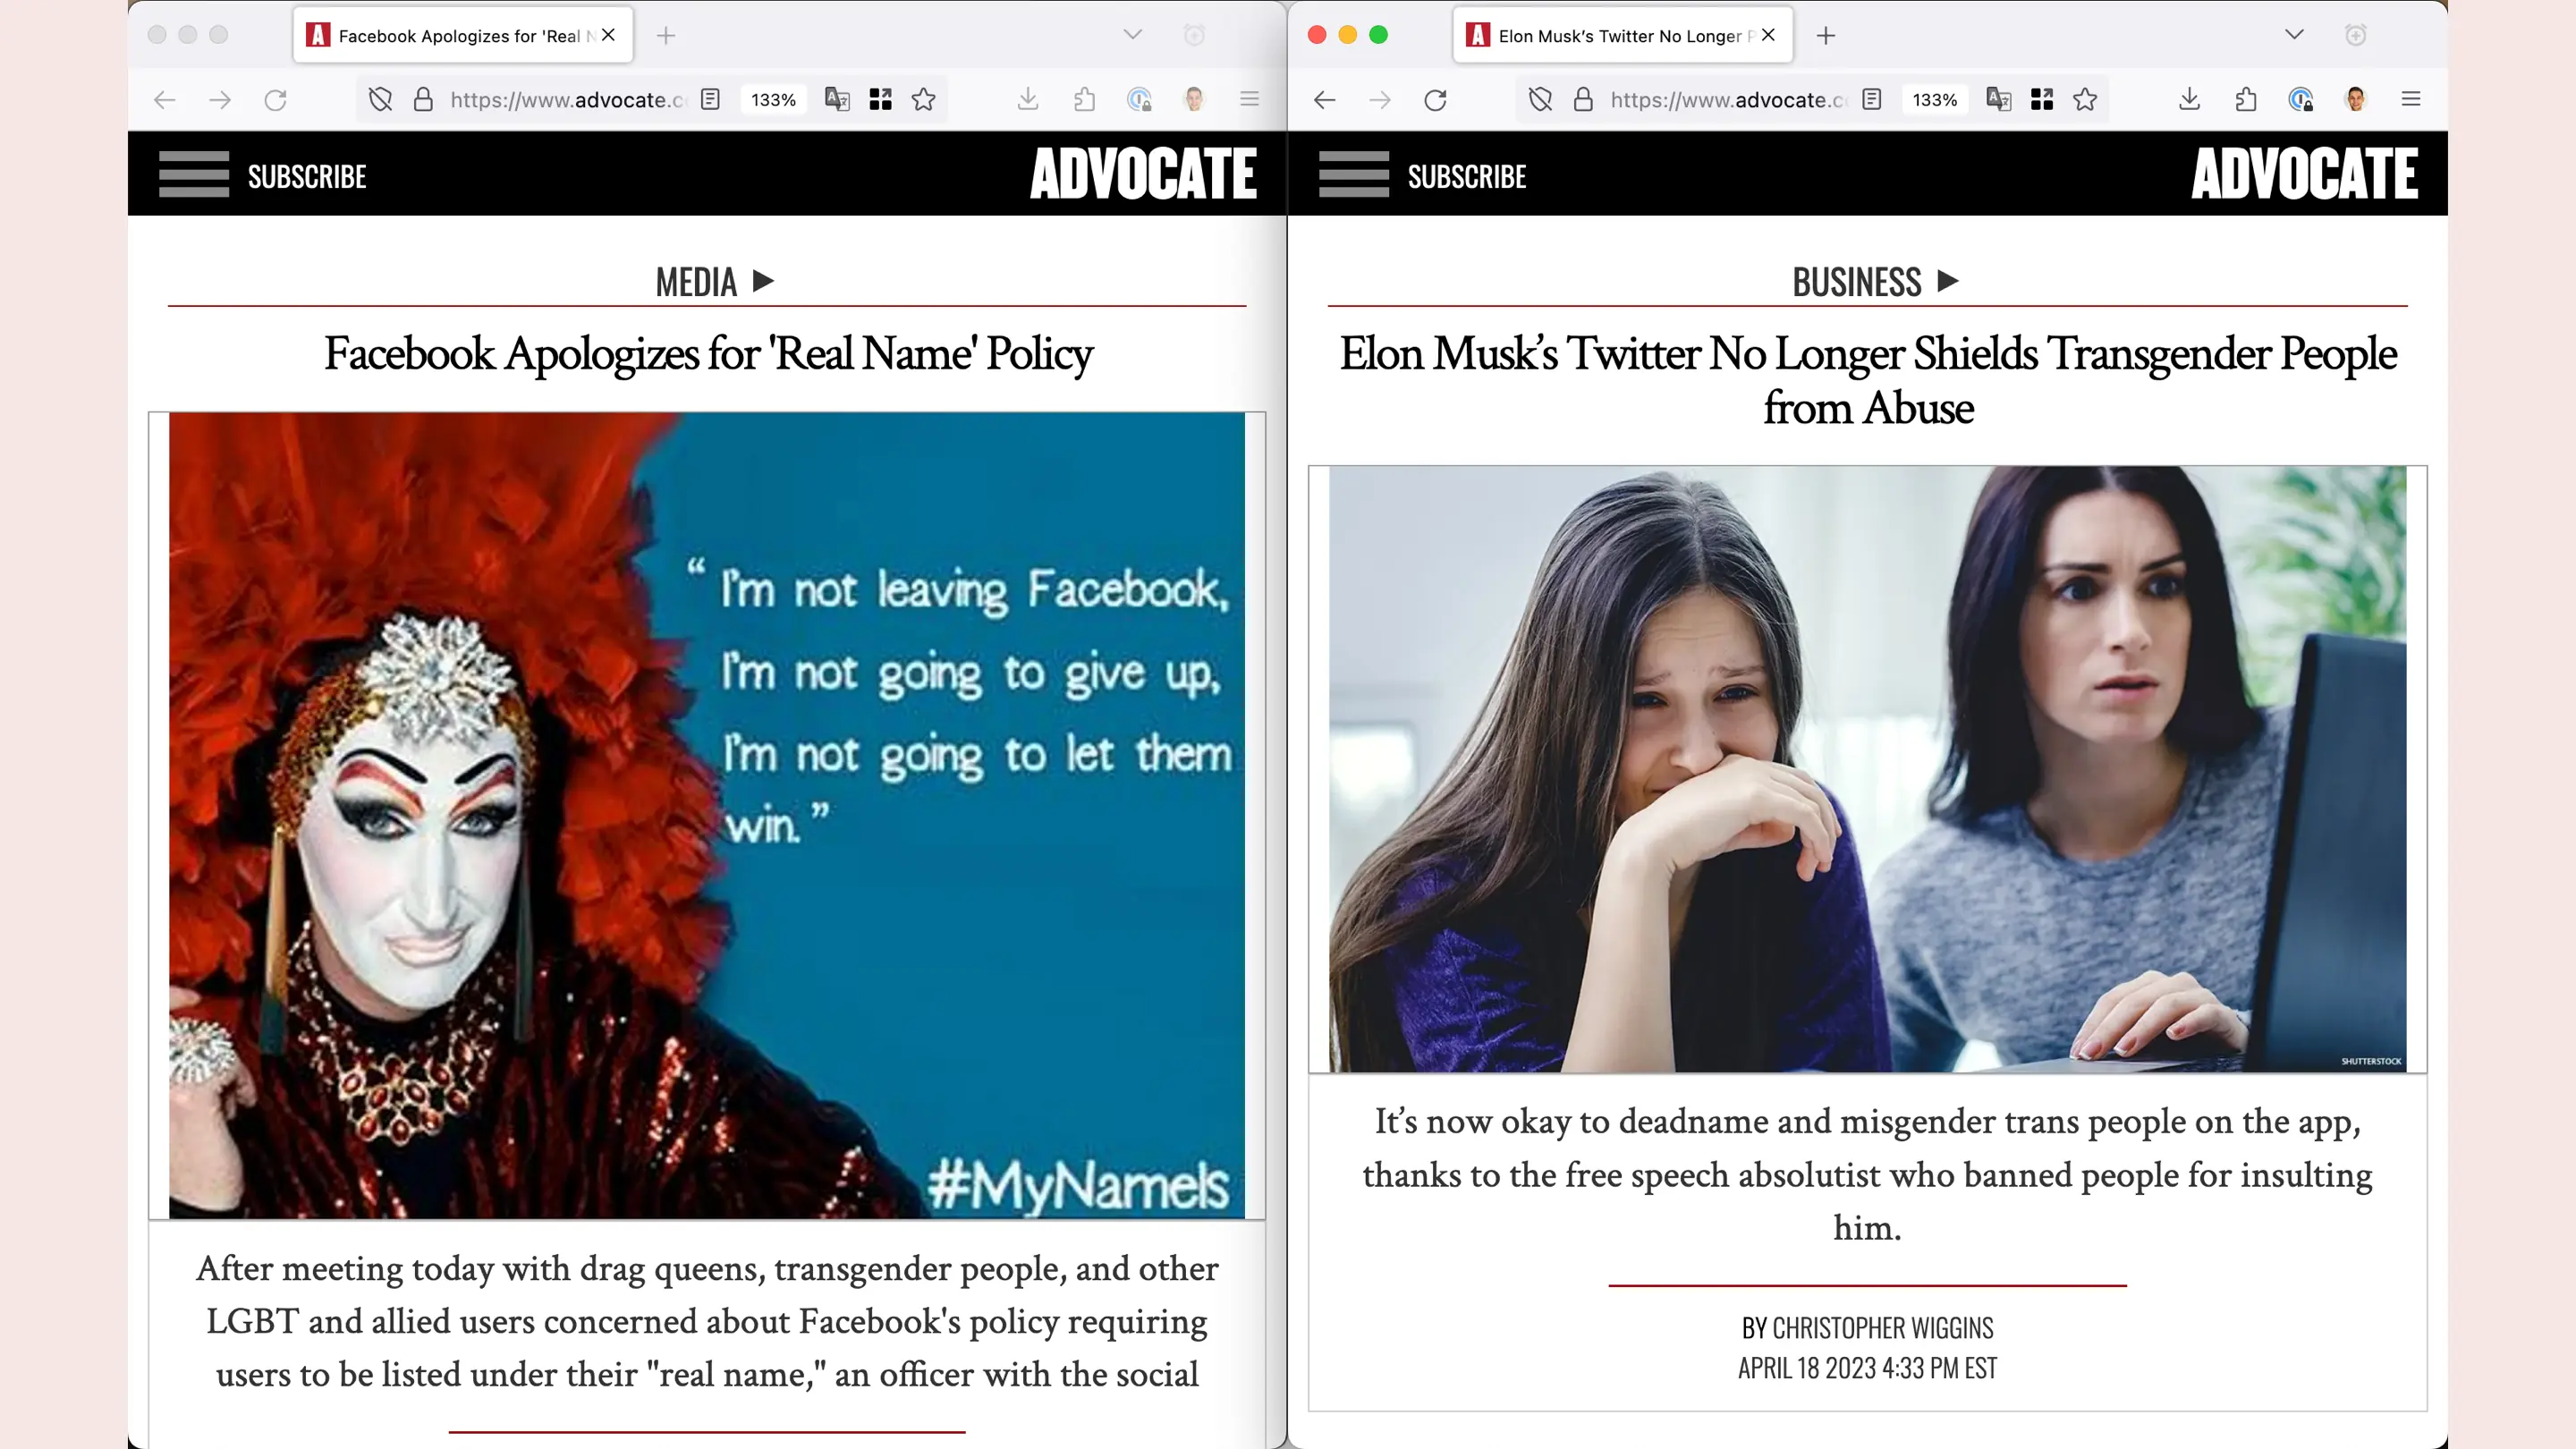 Screenshots of 2 articles from Advocate. Headlines: Facebook apologies for real name policy. Elon Musk's Twitter no longer shields transgender people from abuse.